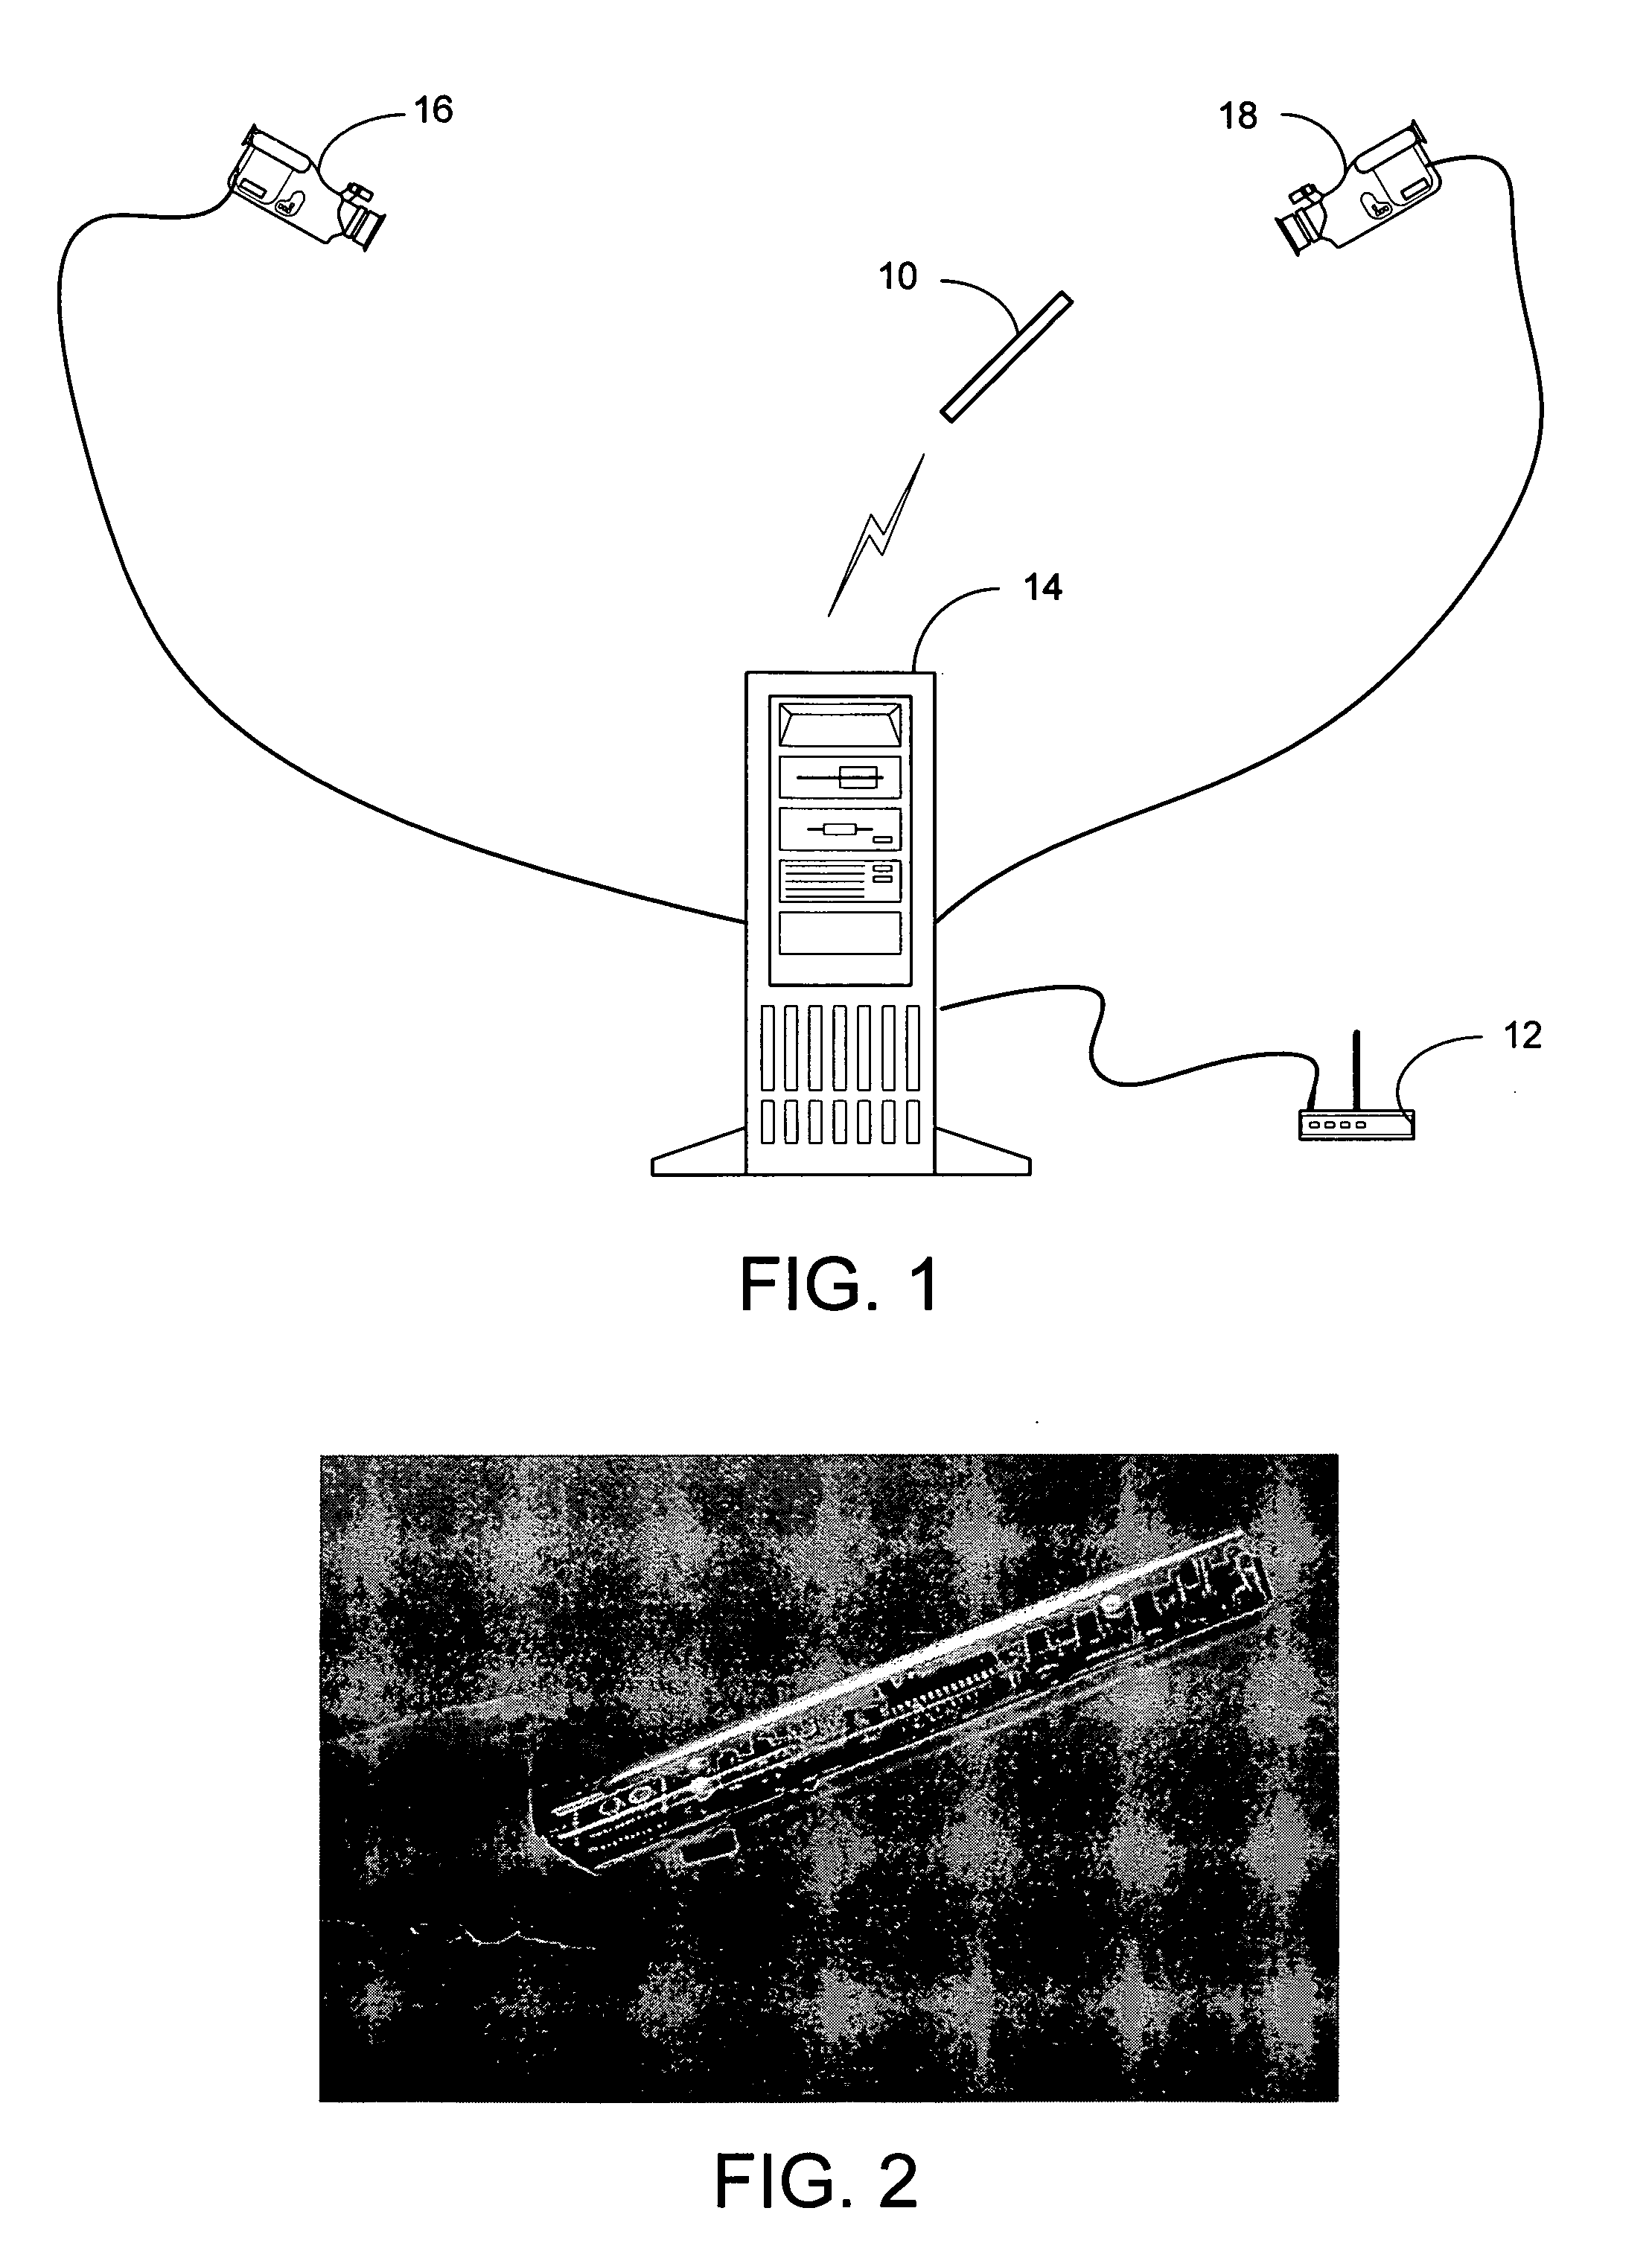 System and process for selecting objects in a ubiquitous computing environment